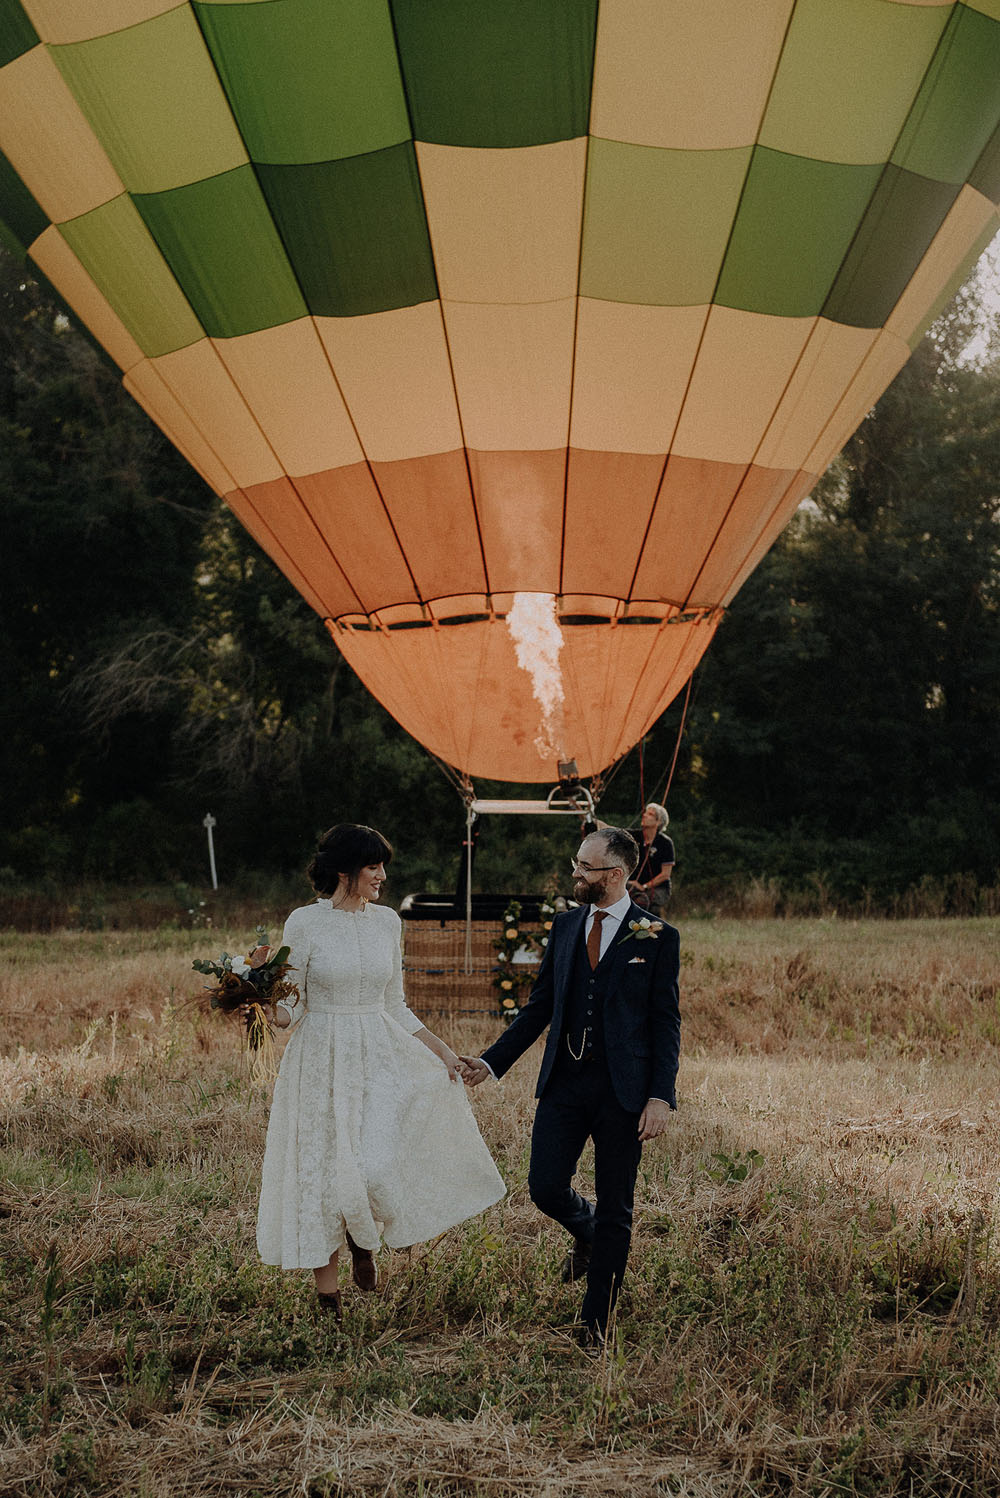 Vintage sunrise hot air balloon elopement over Tuscany | Elopements